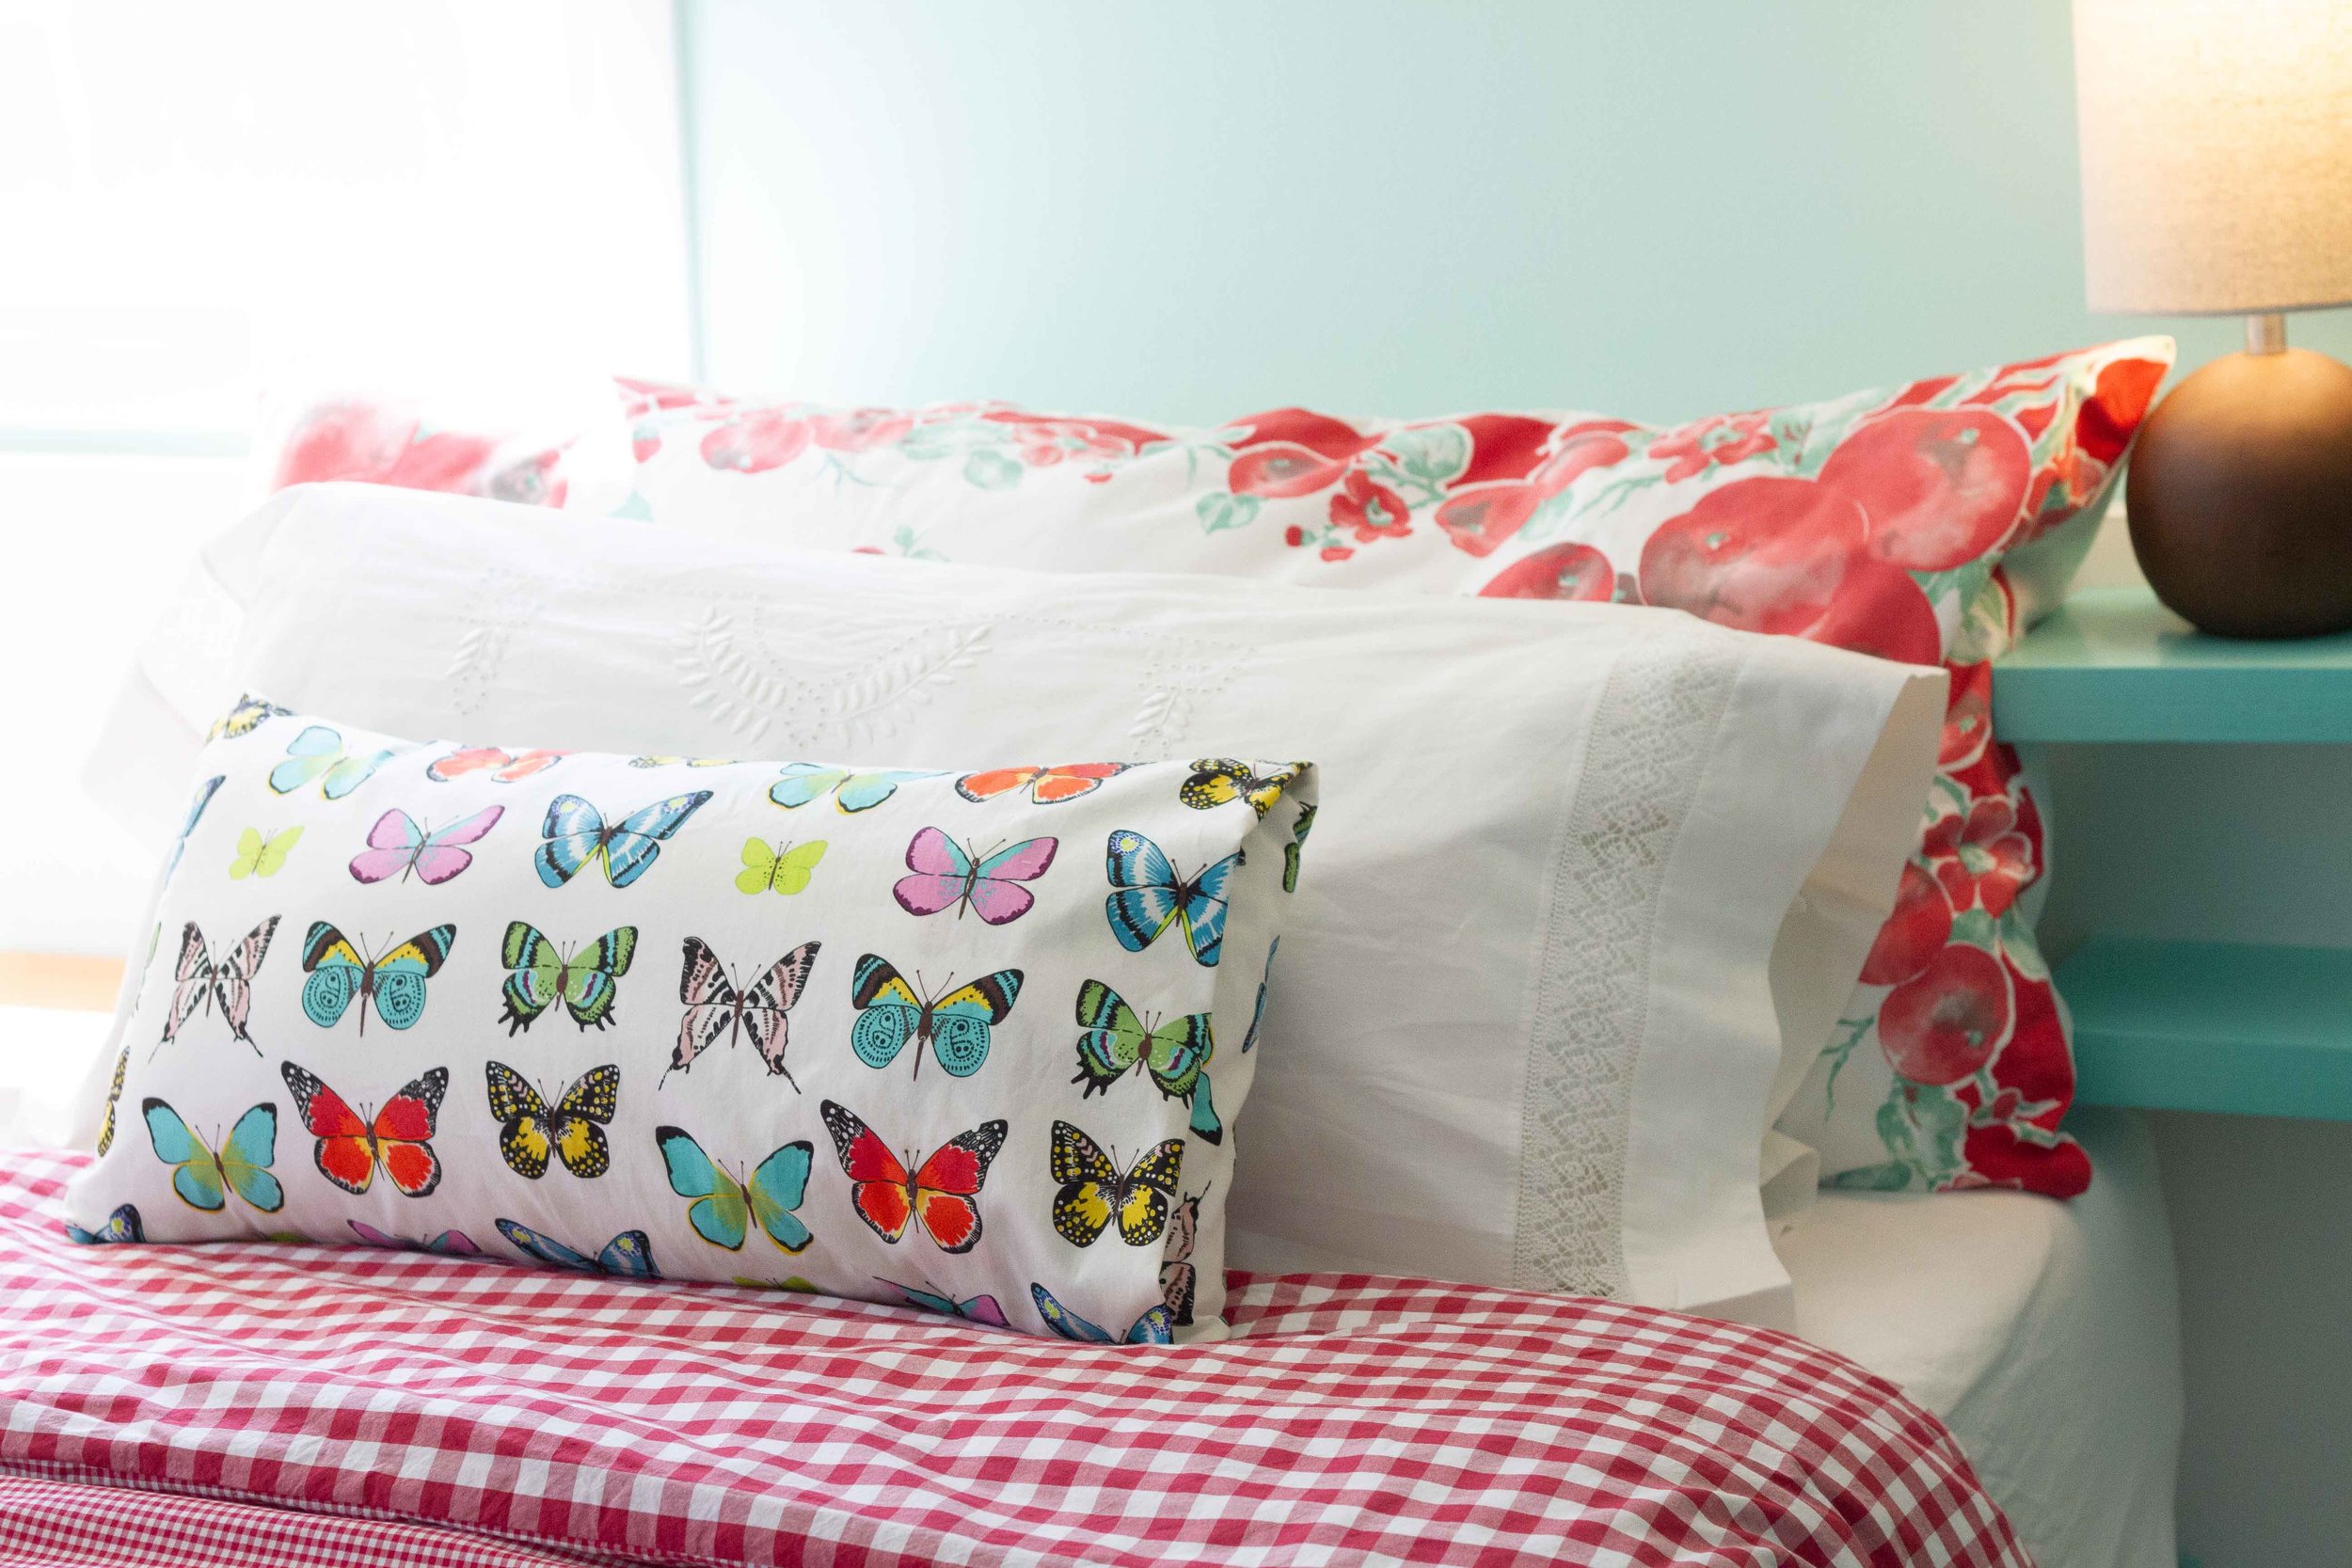 The Easiest Way To Put On A Duvet Cover, How To Put On A Duvet Cover With Strings